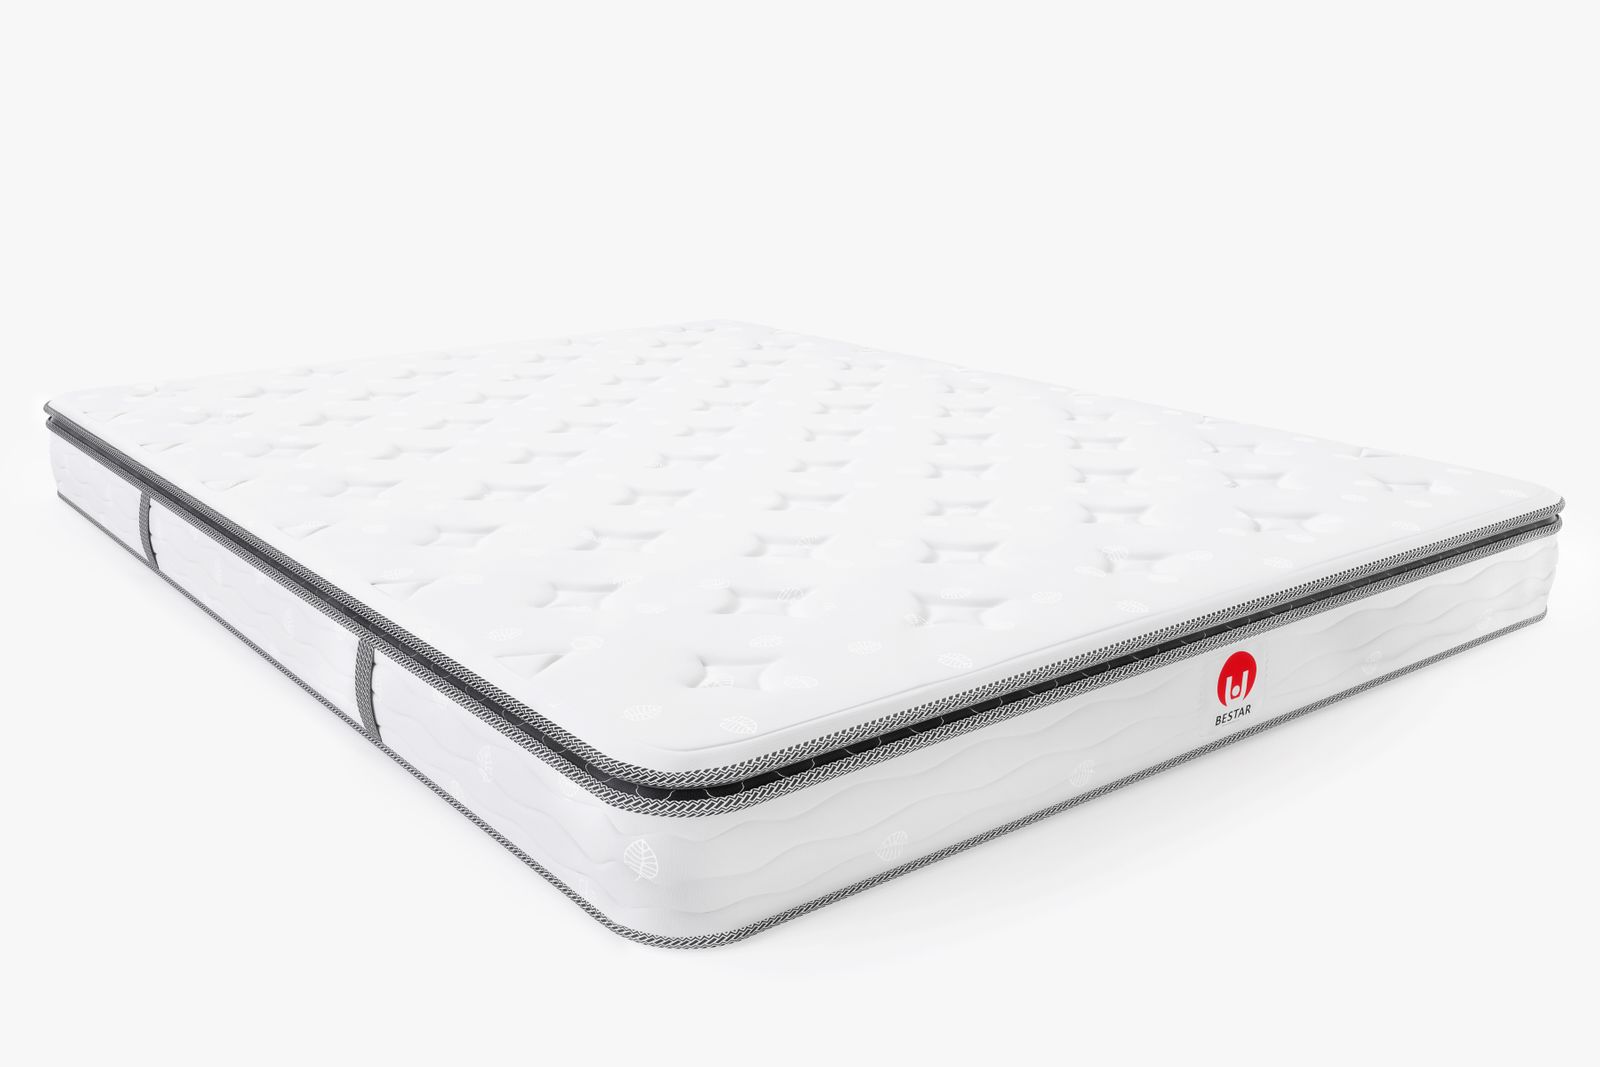 4 Questions to Help Make the Right Mattress Choice for You